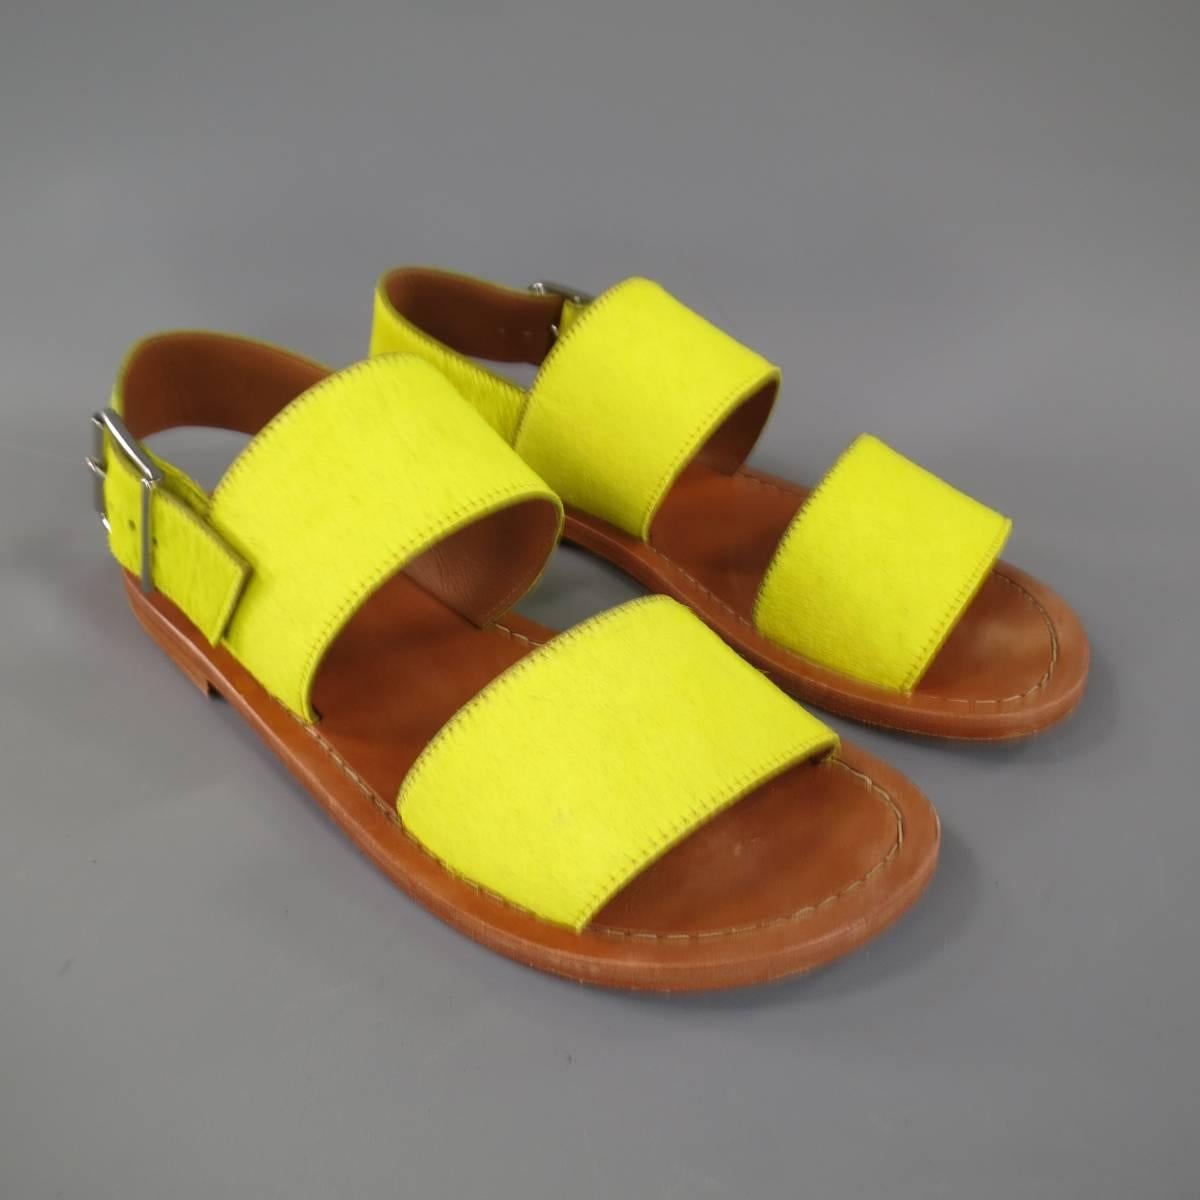 These rare MARNI sandals come in bright yellow pony hair leather and features two thick straps, ankle strap closure with silver tone oversized buckle, and tan leather sole.
 
Excellent Pre-Owned Condition.
Marked: 41
 
11 x 4.5 in.
